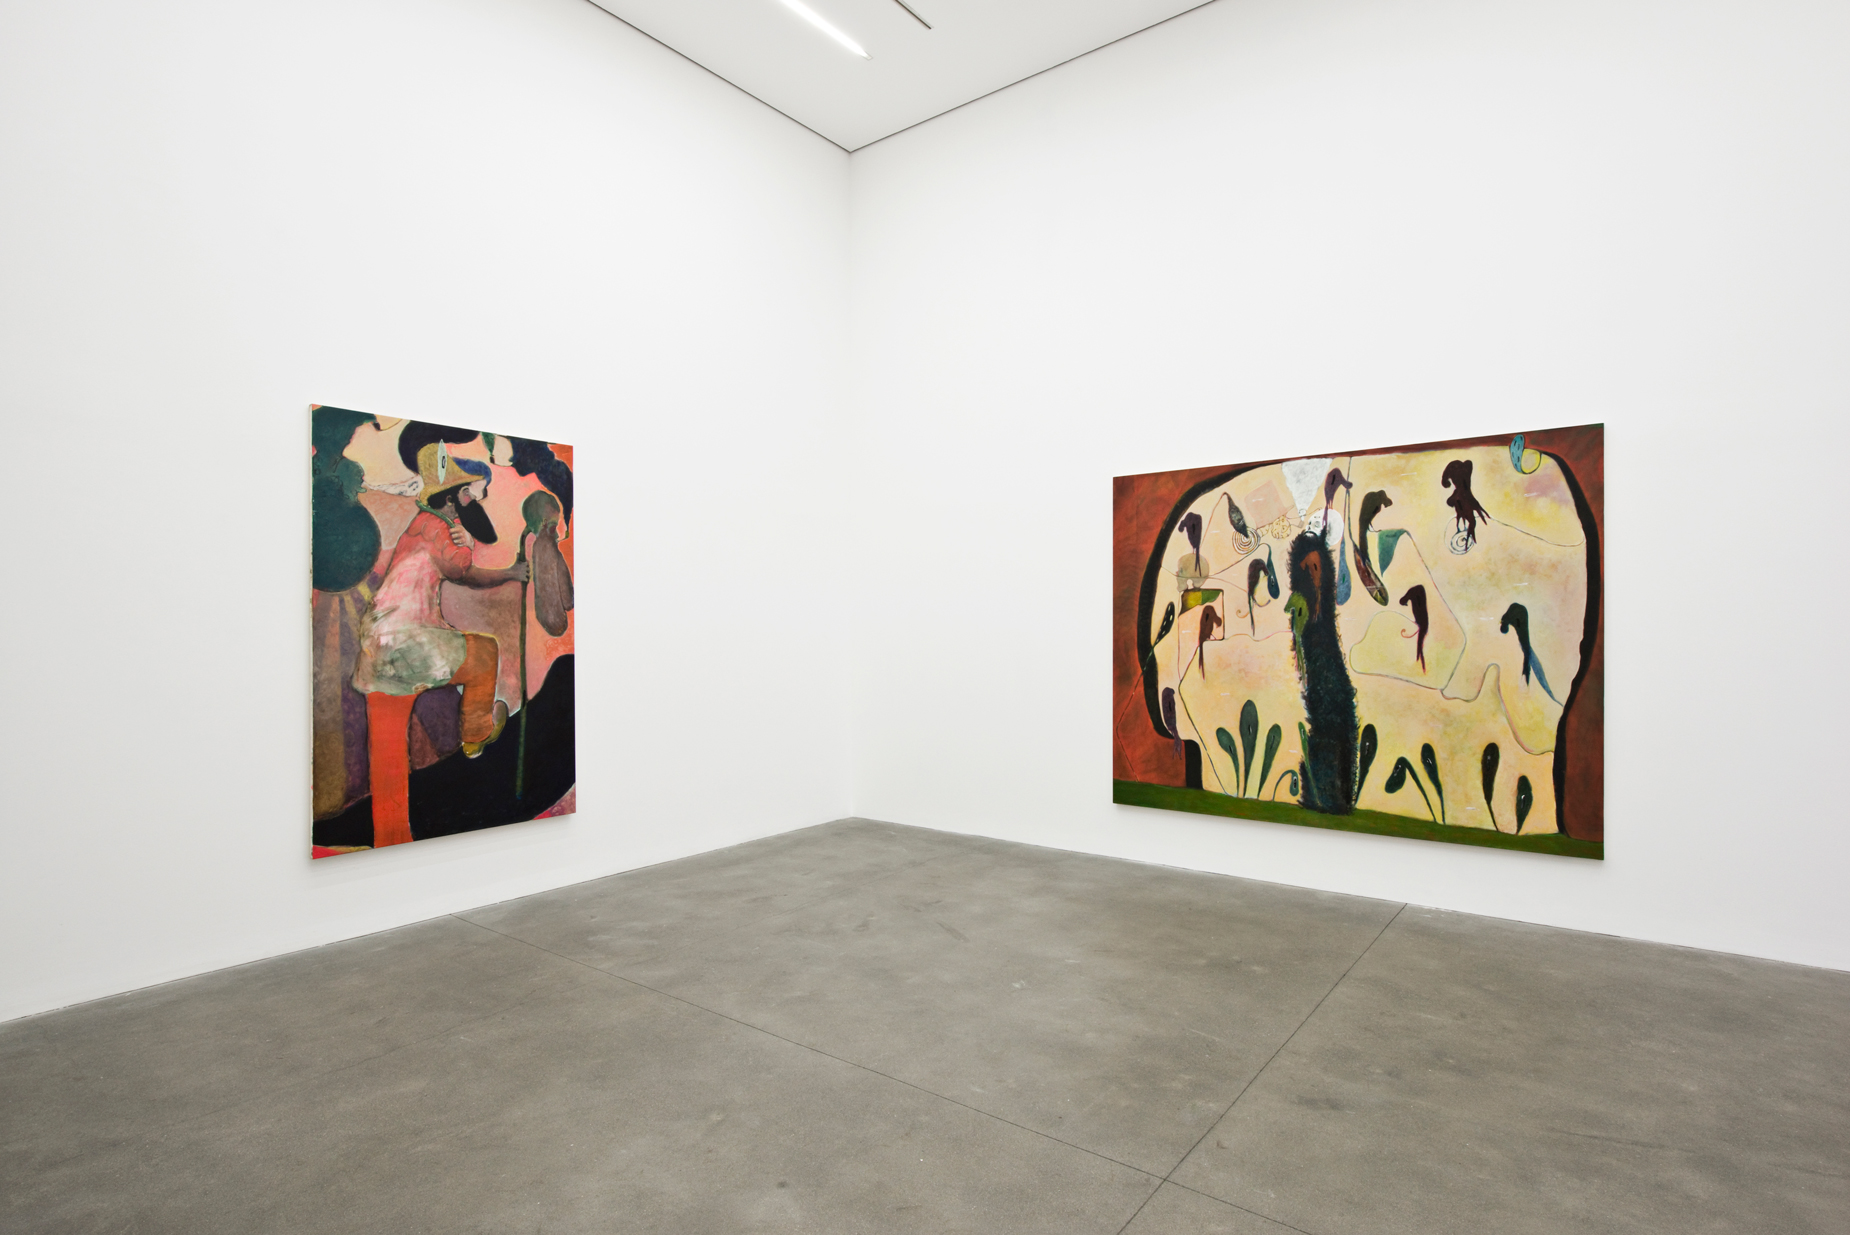 4 - Ryan Mosley at Alison Jacques 2014 London - 21.03.2014